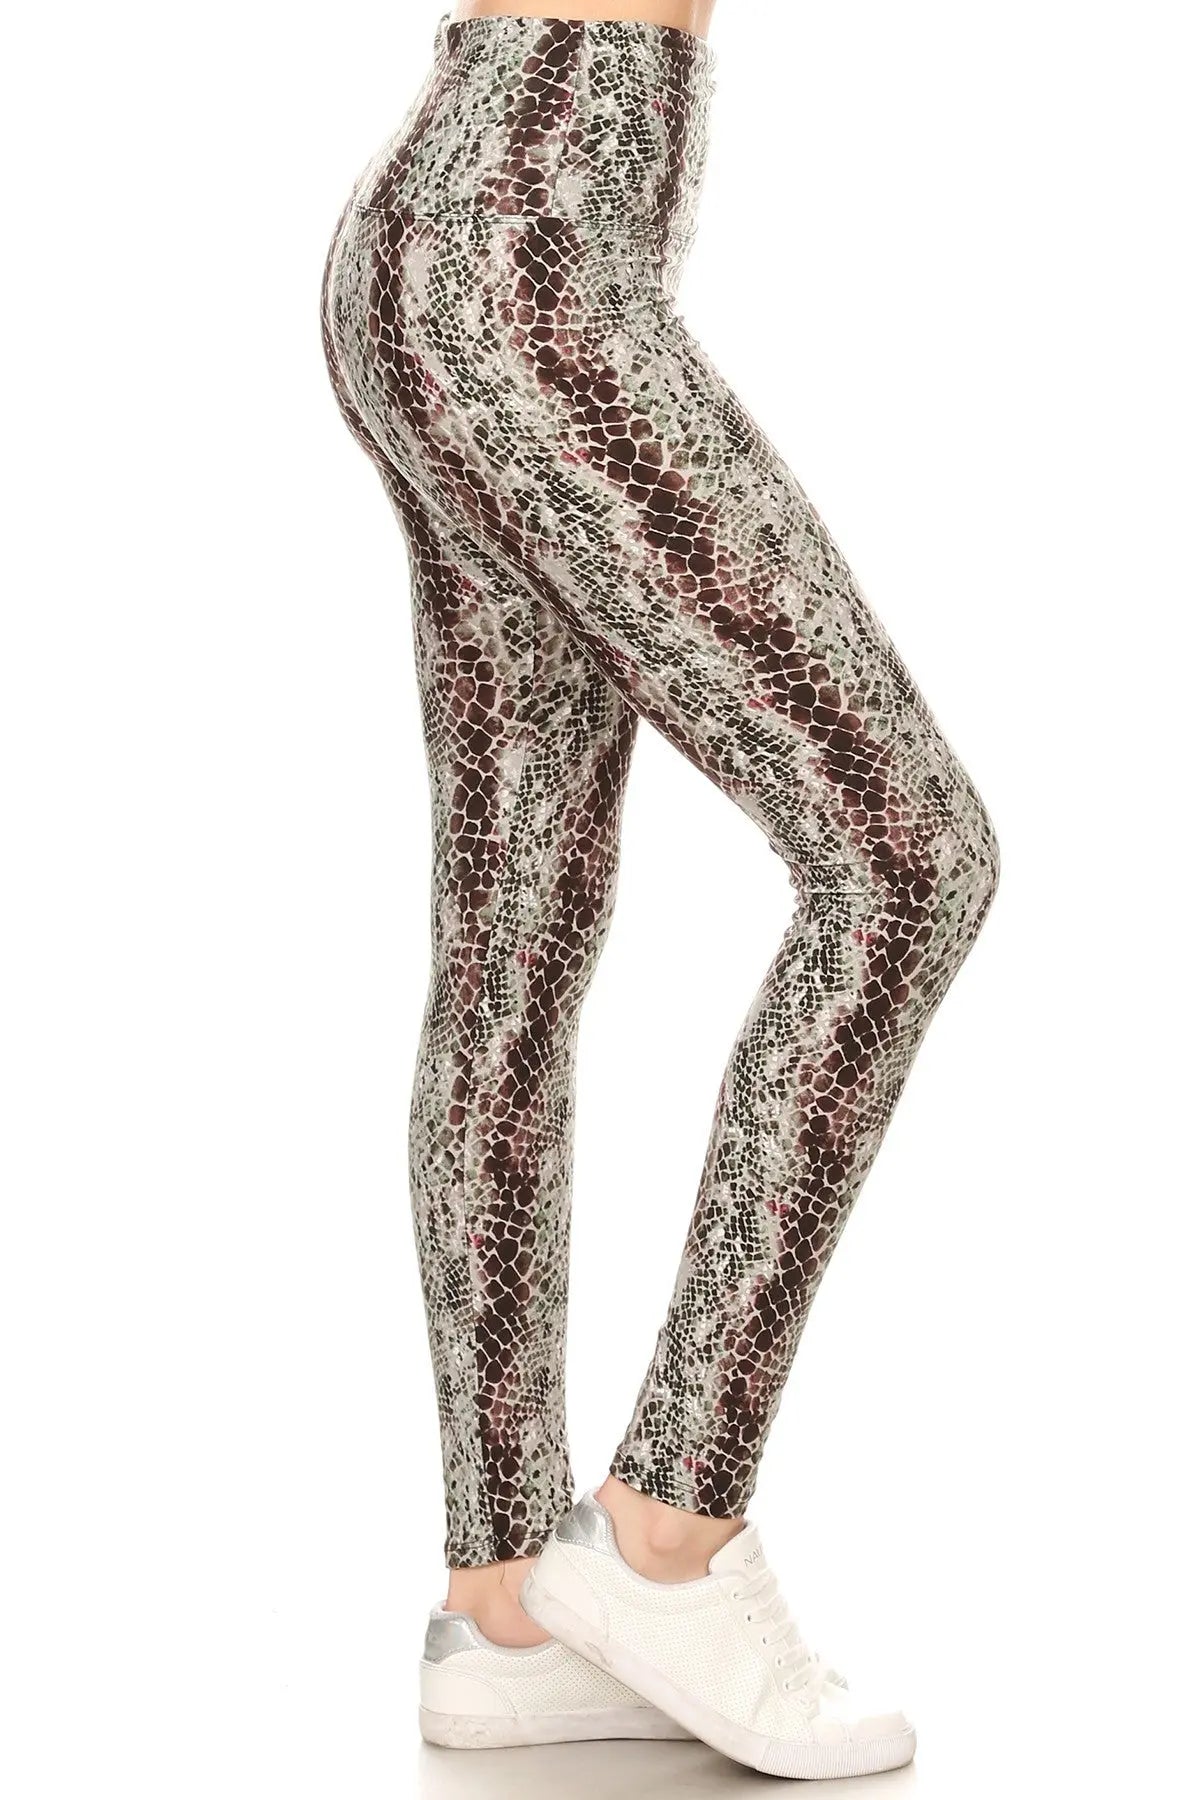 Yoga Style Banded Lined Snakeskin Printed Knit Legging With High Waist. Sunny EvE Fashion